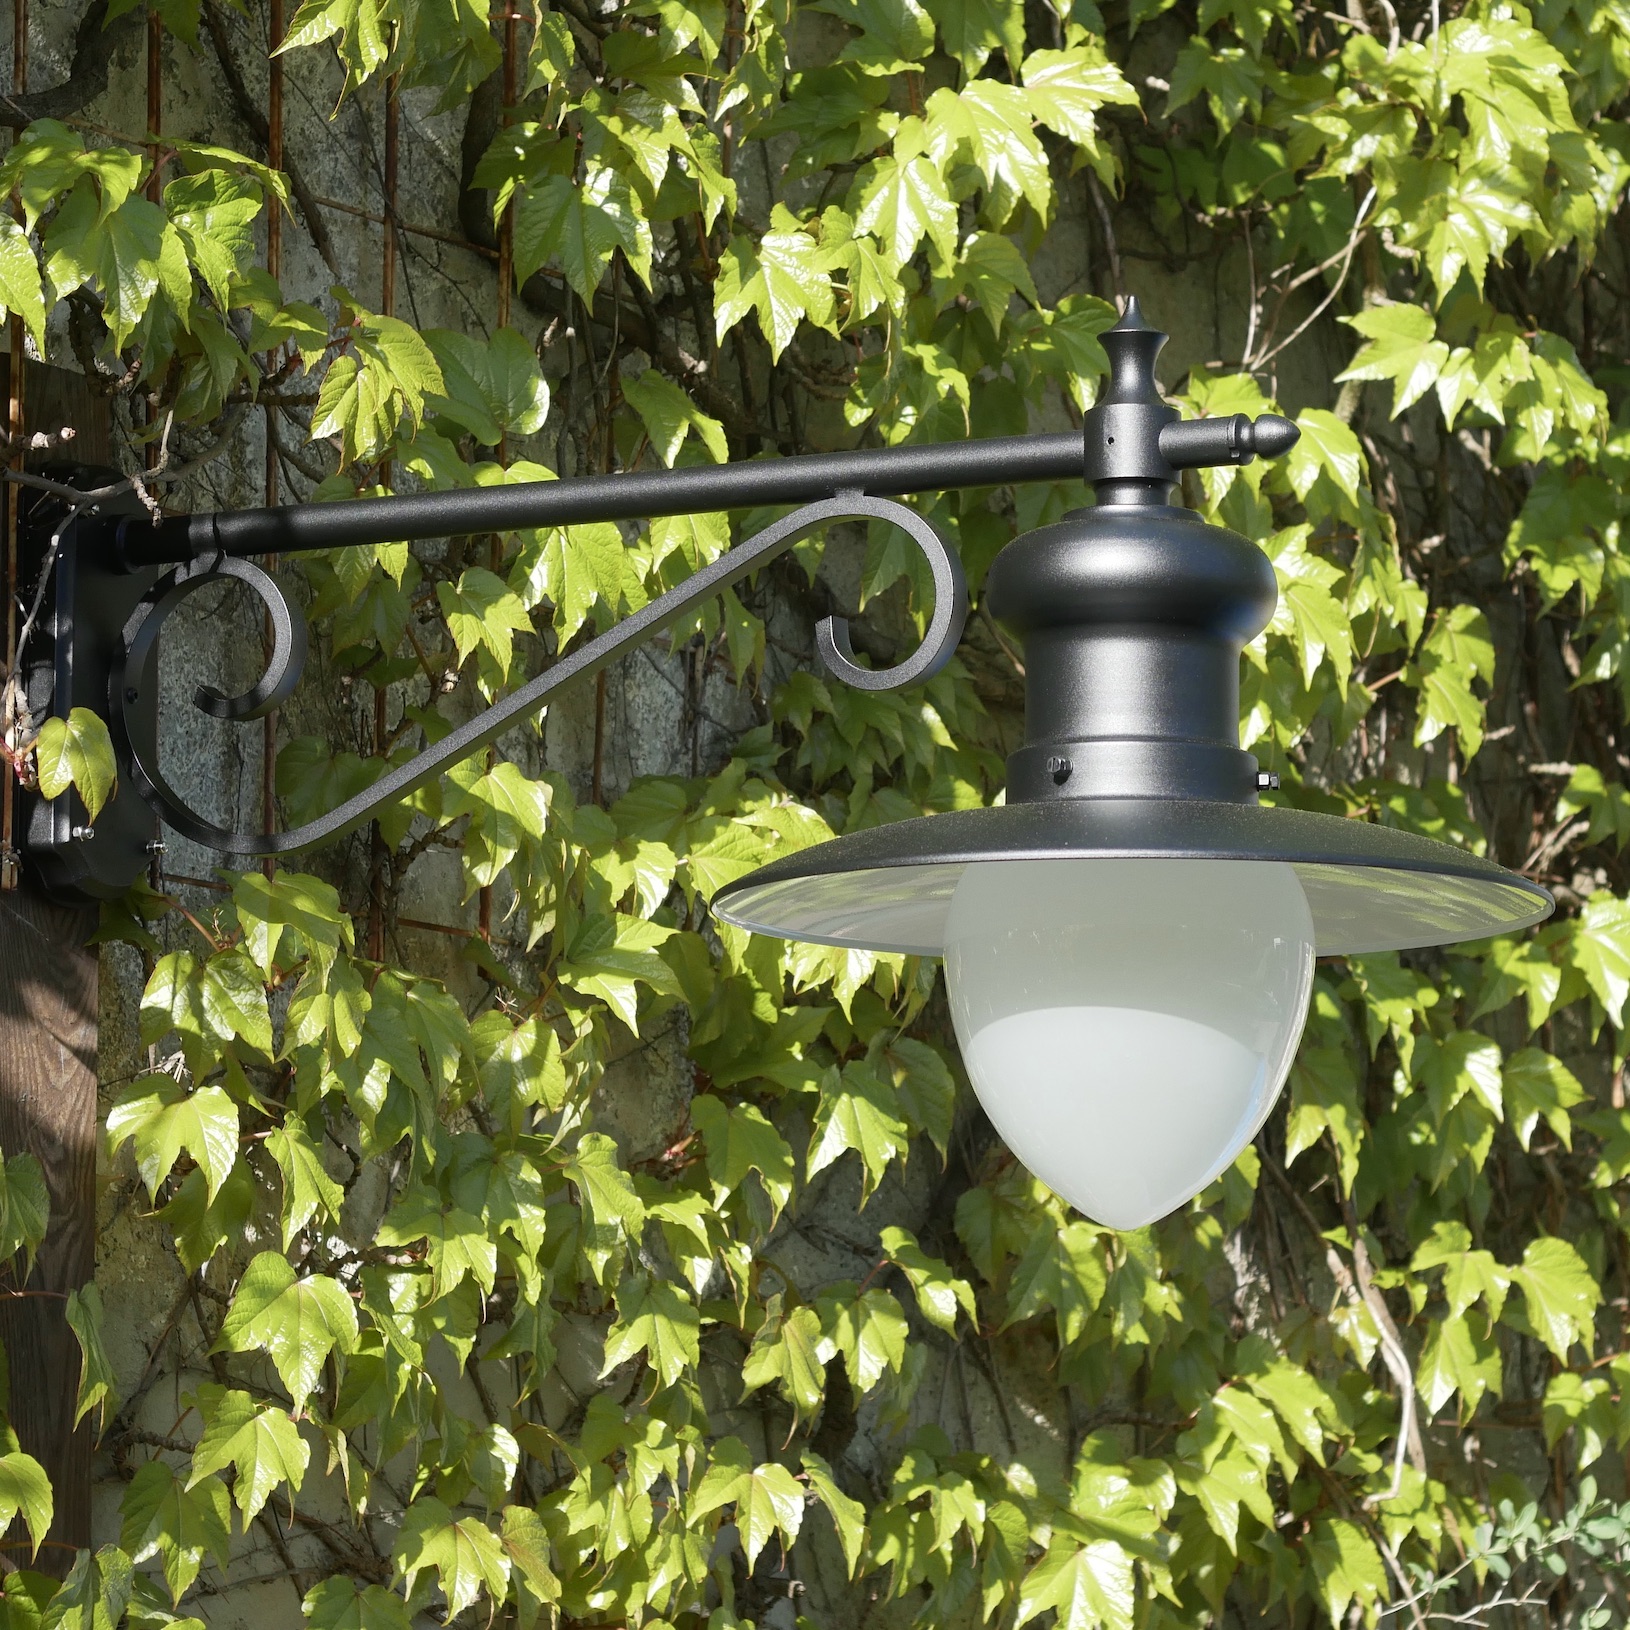 Large Wall Light with a Long Boom-arm (Ø 515 mm)